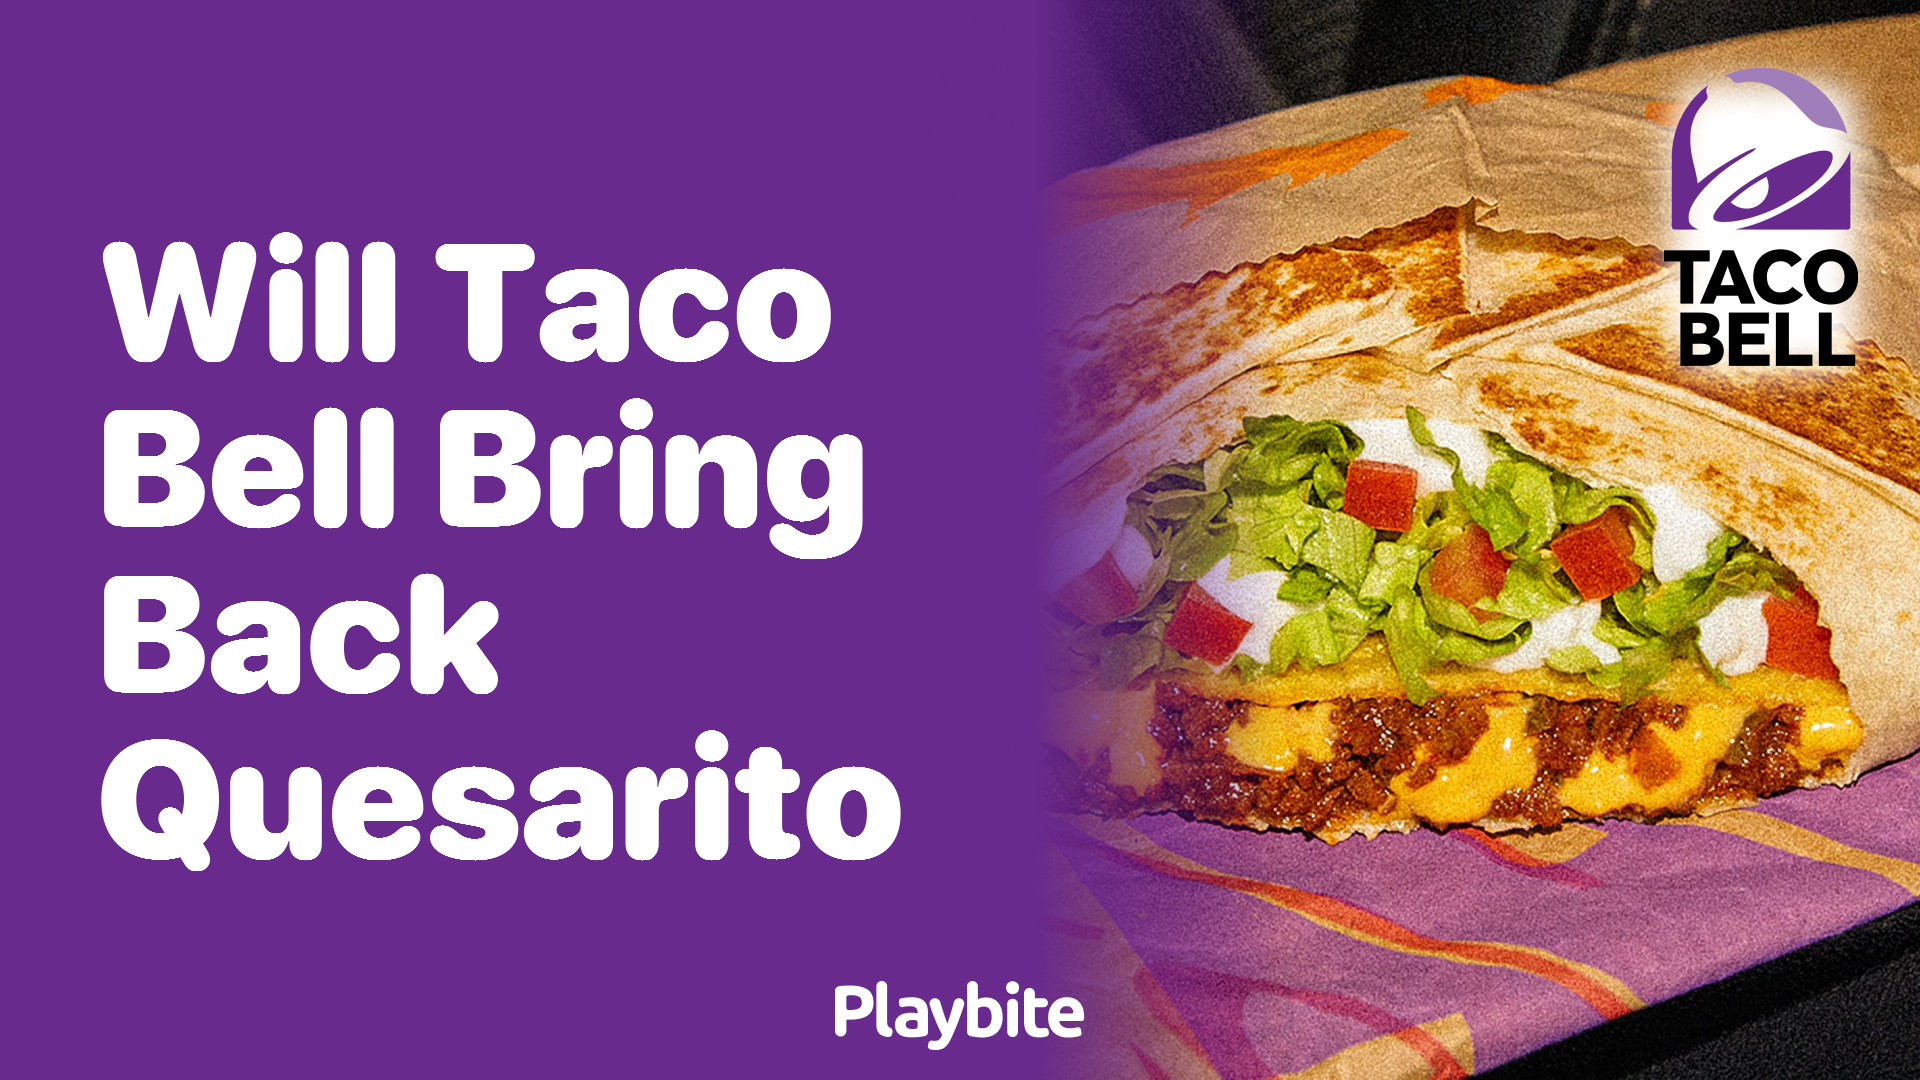 Will Taco Bell Bring Back the Quesarito?